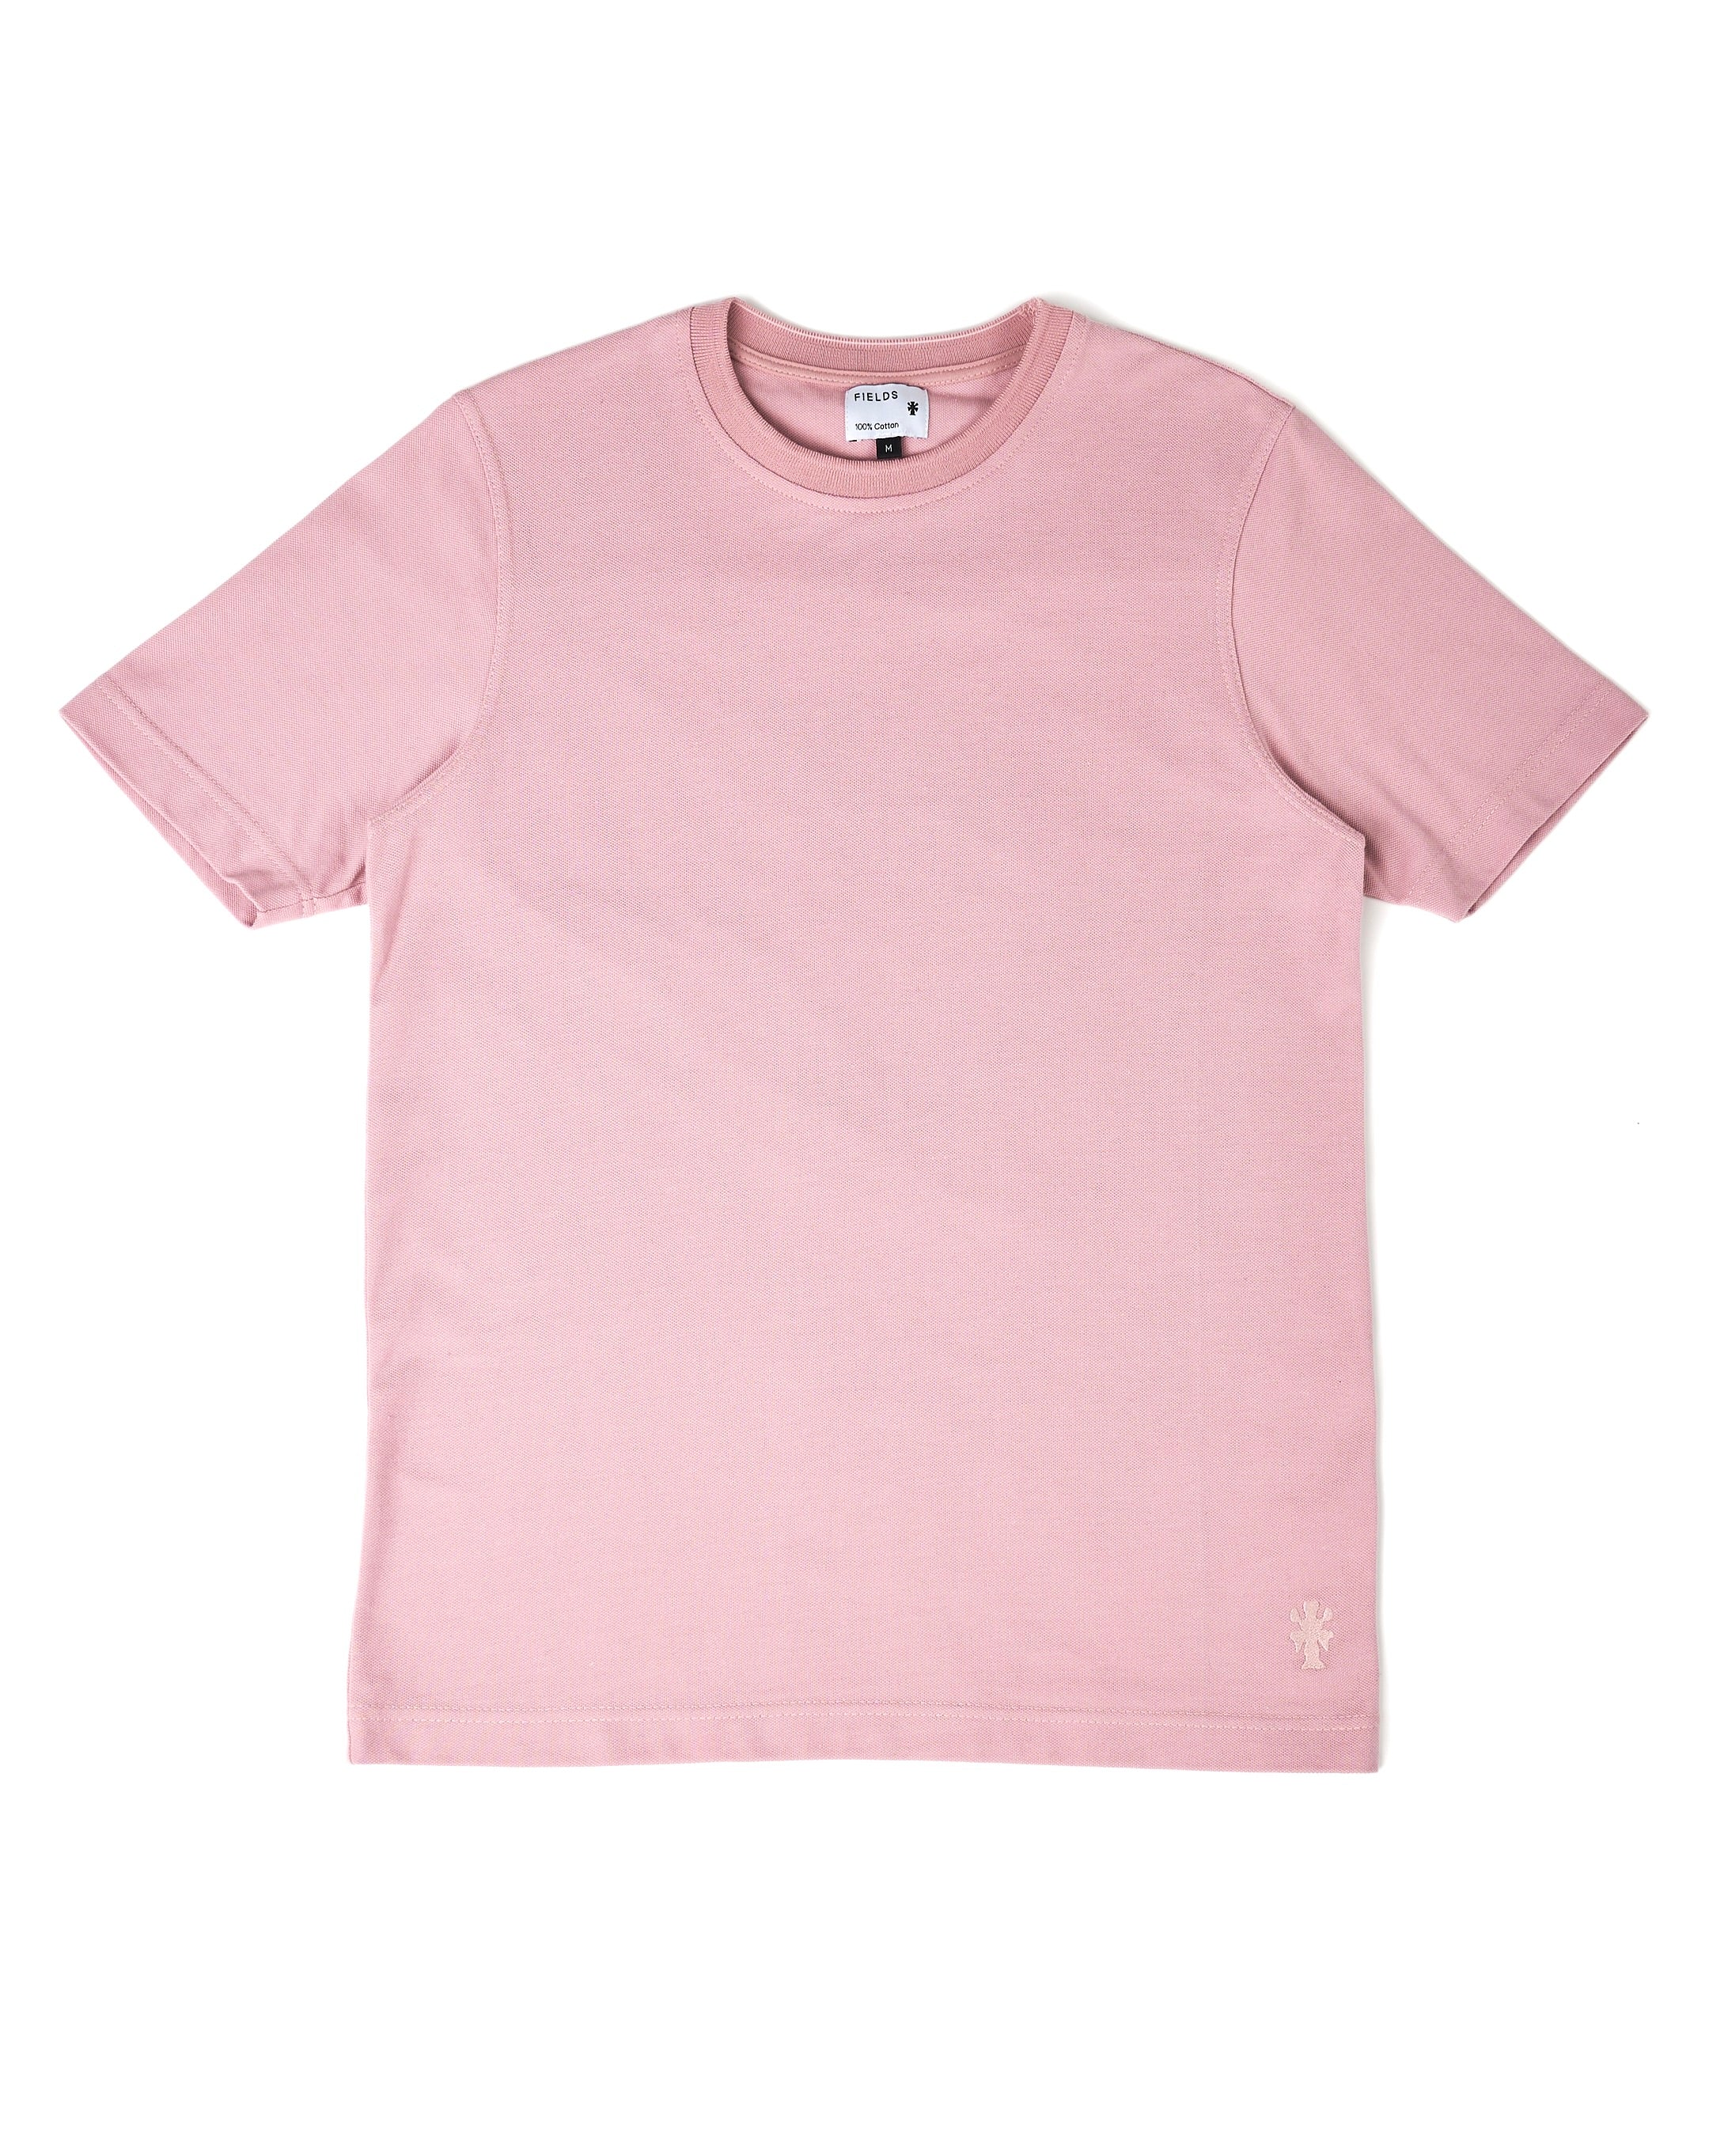 The Pique Tee in Dusty Pink